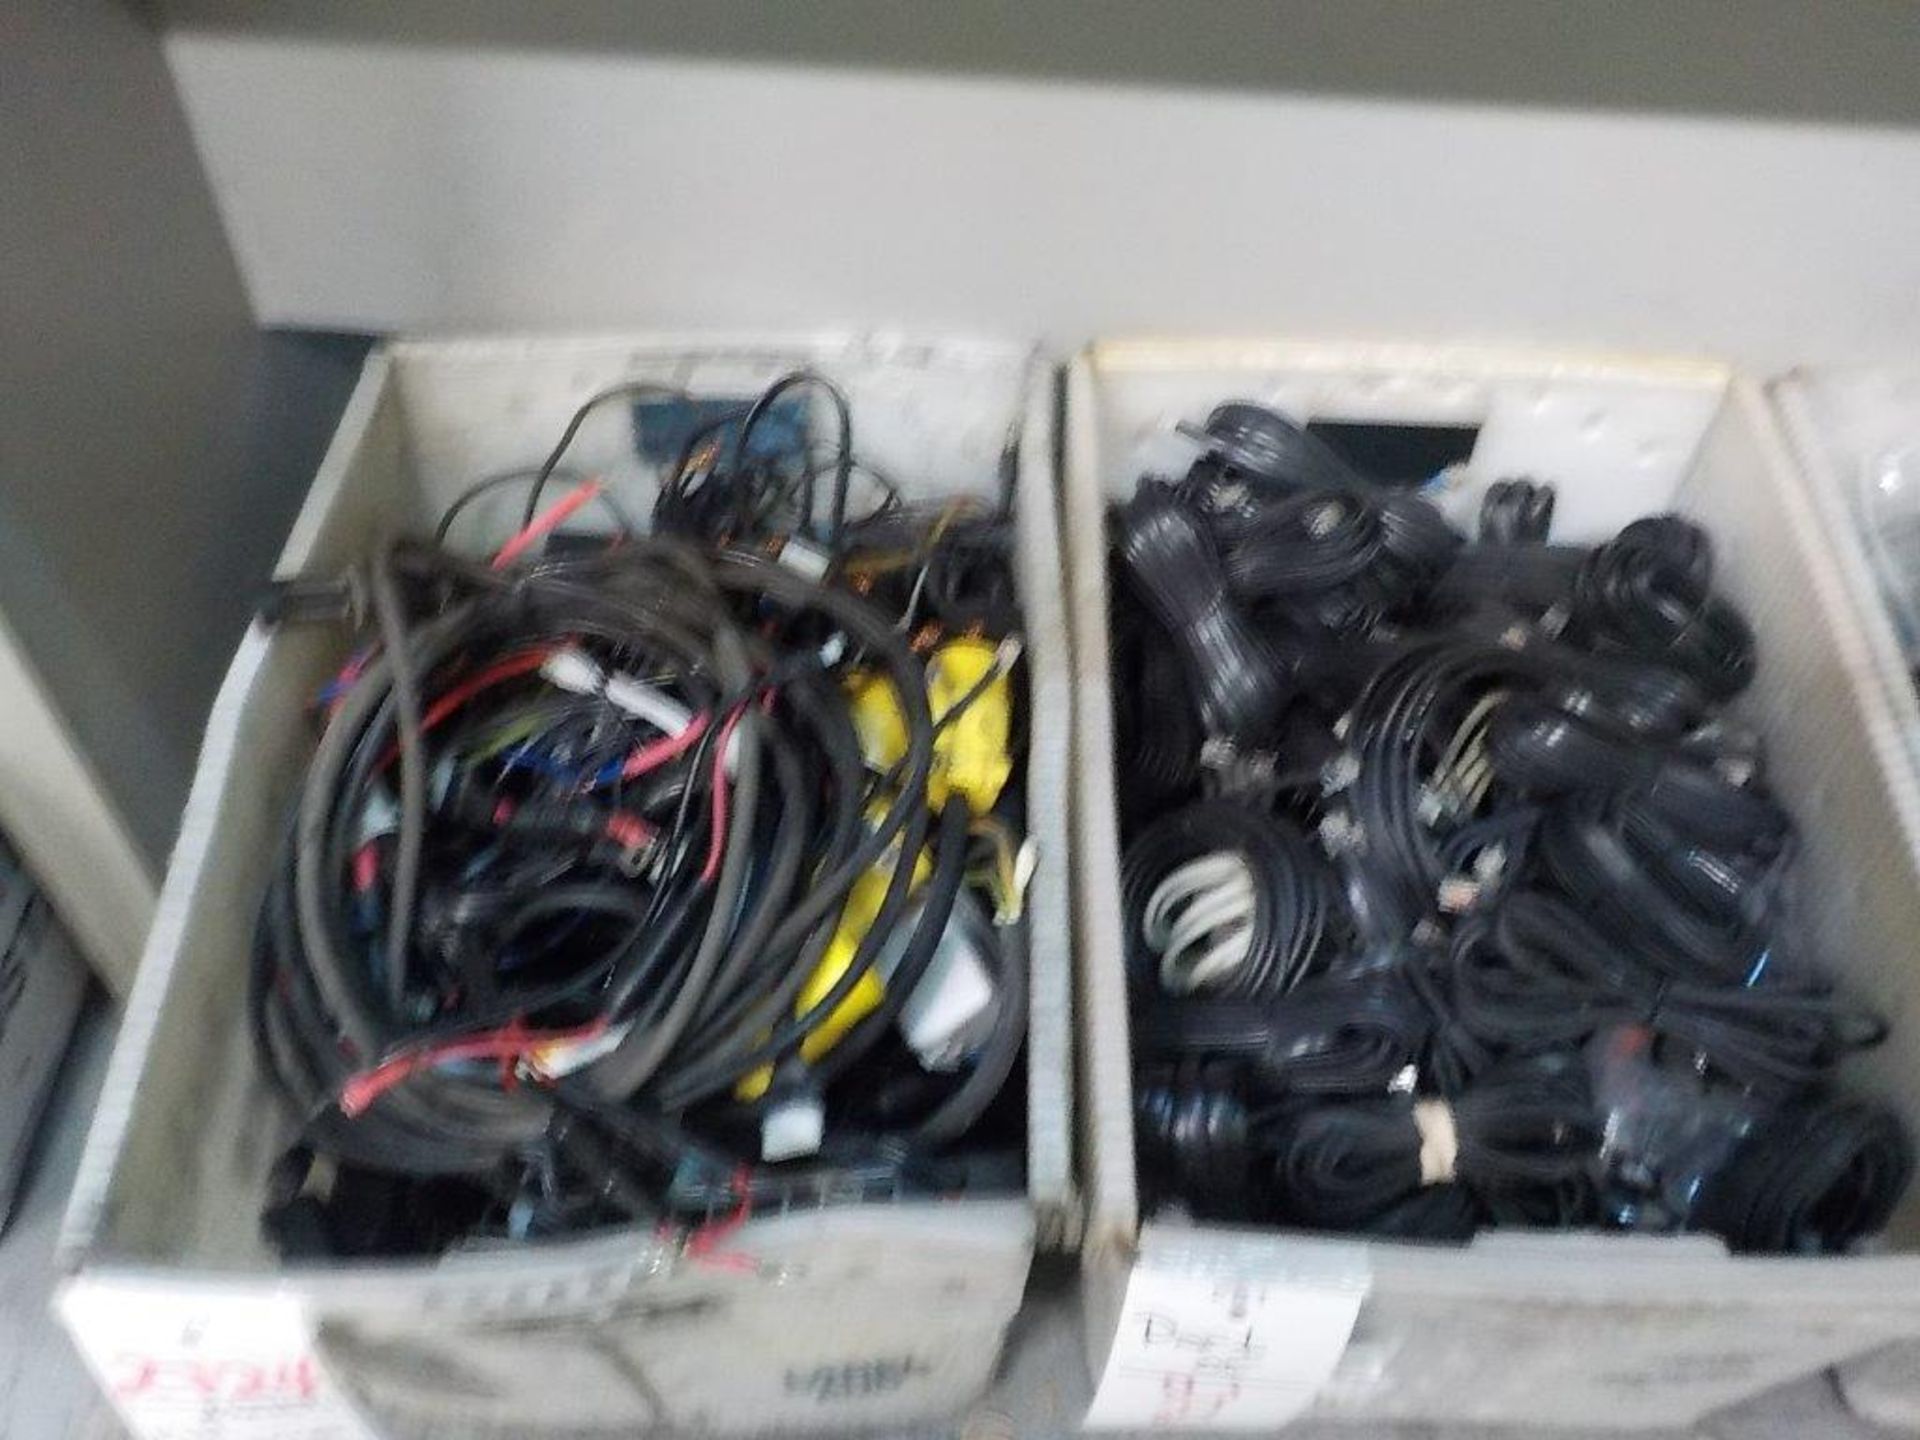 ASSORTED WIRES, ETC. (BASKETS)